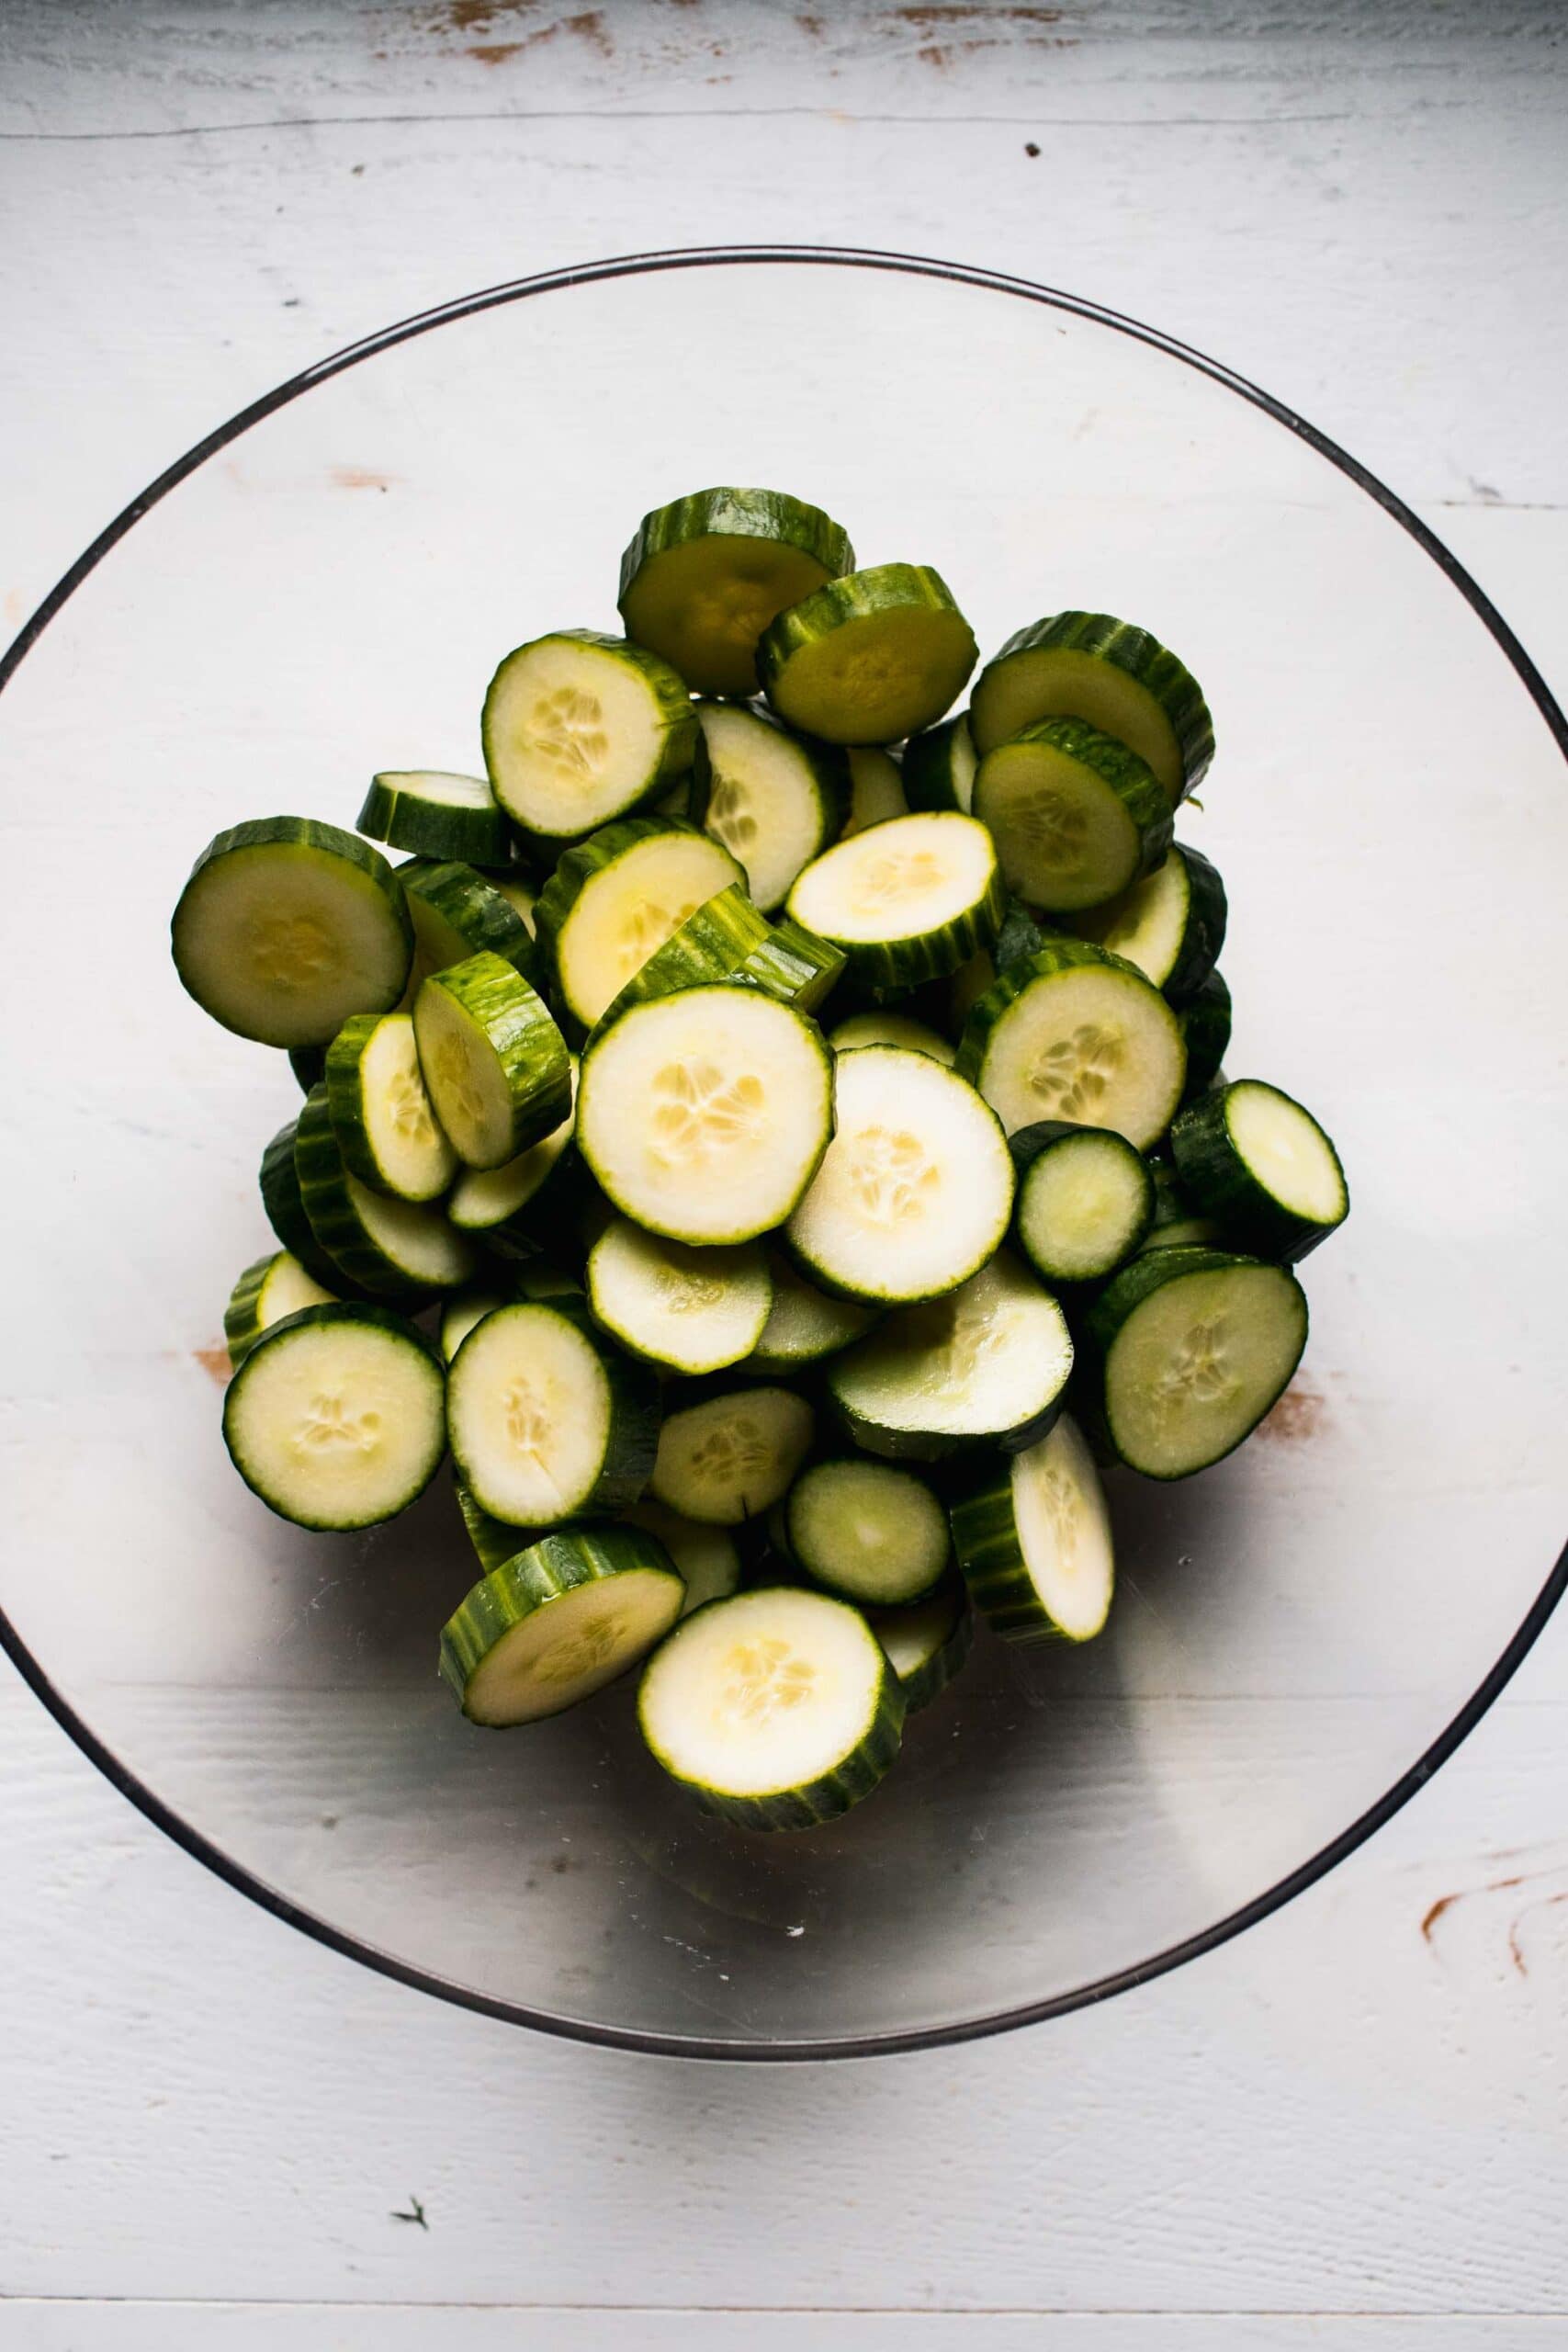 Sliced cucumbers in large bowl.